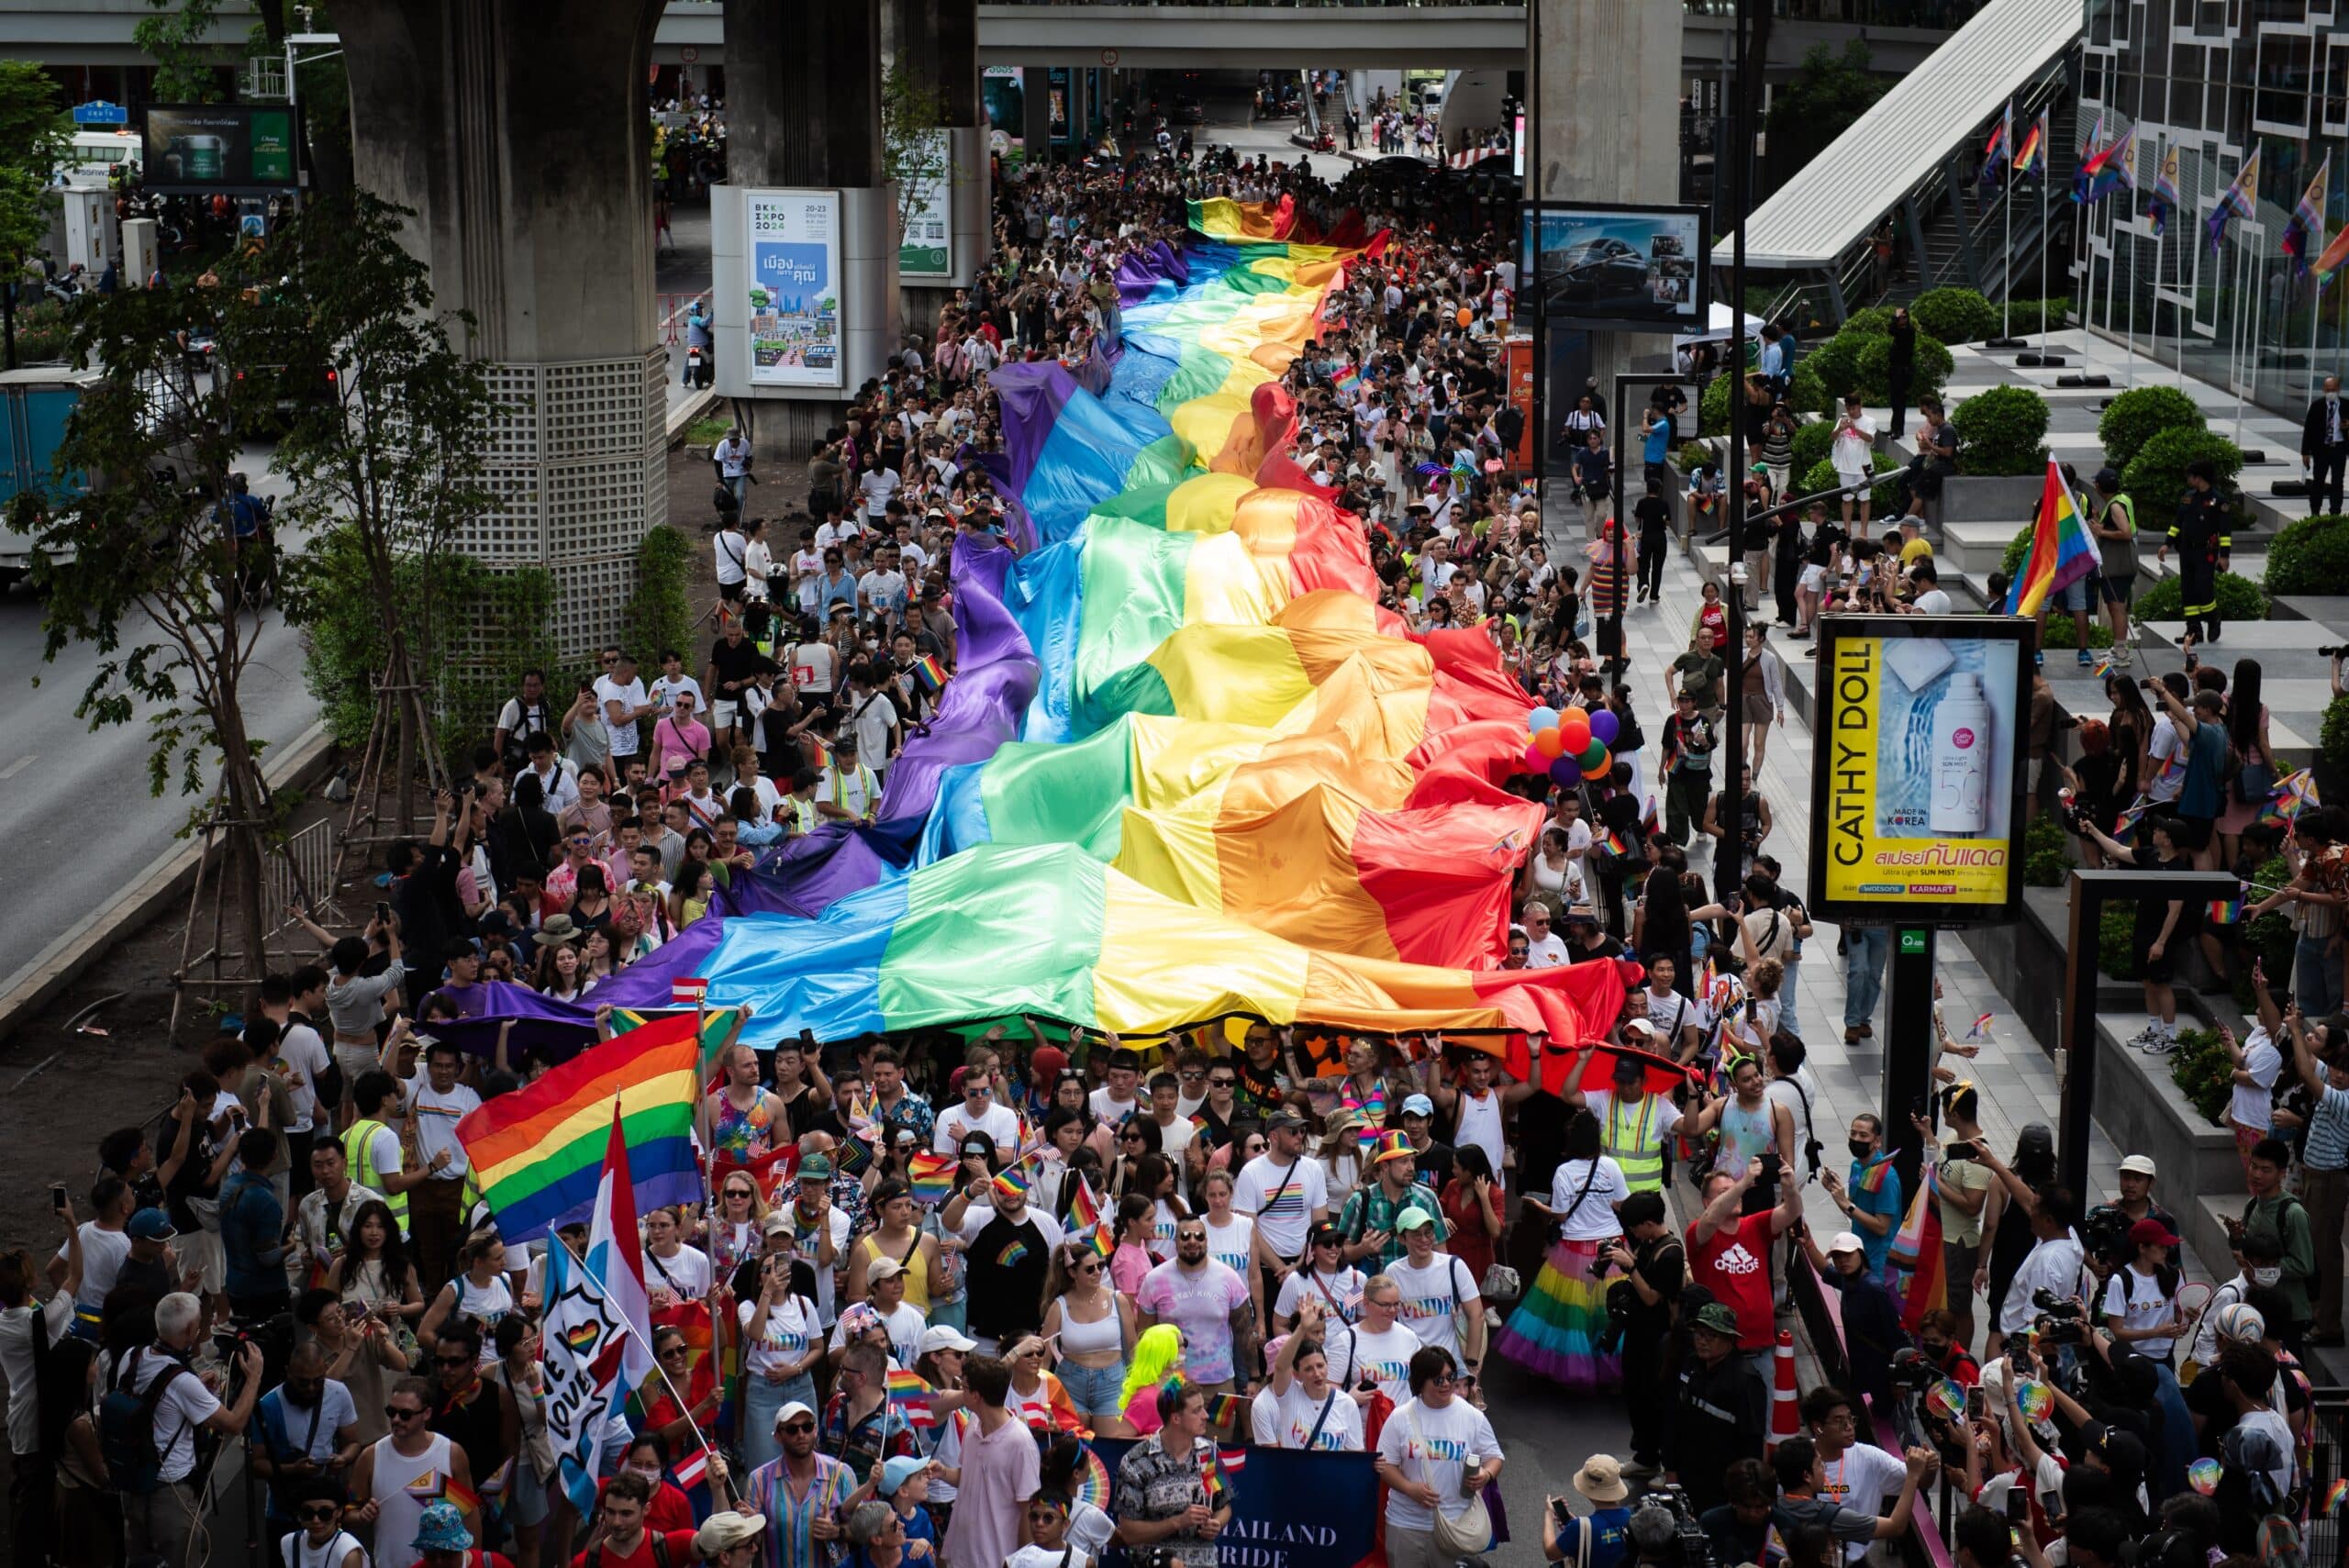 Massive Pride flag is unfurled above a crowd of people walking through Thailand.